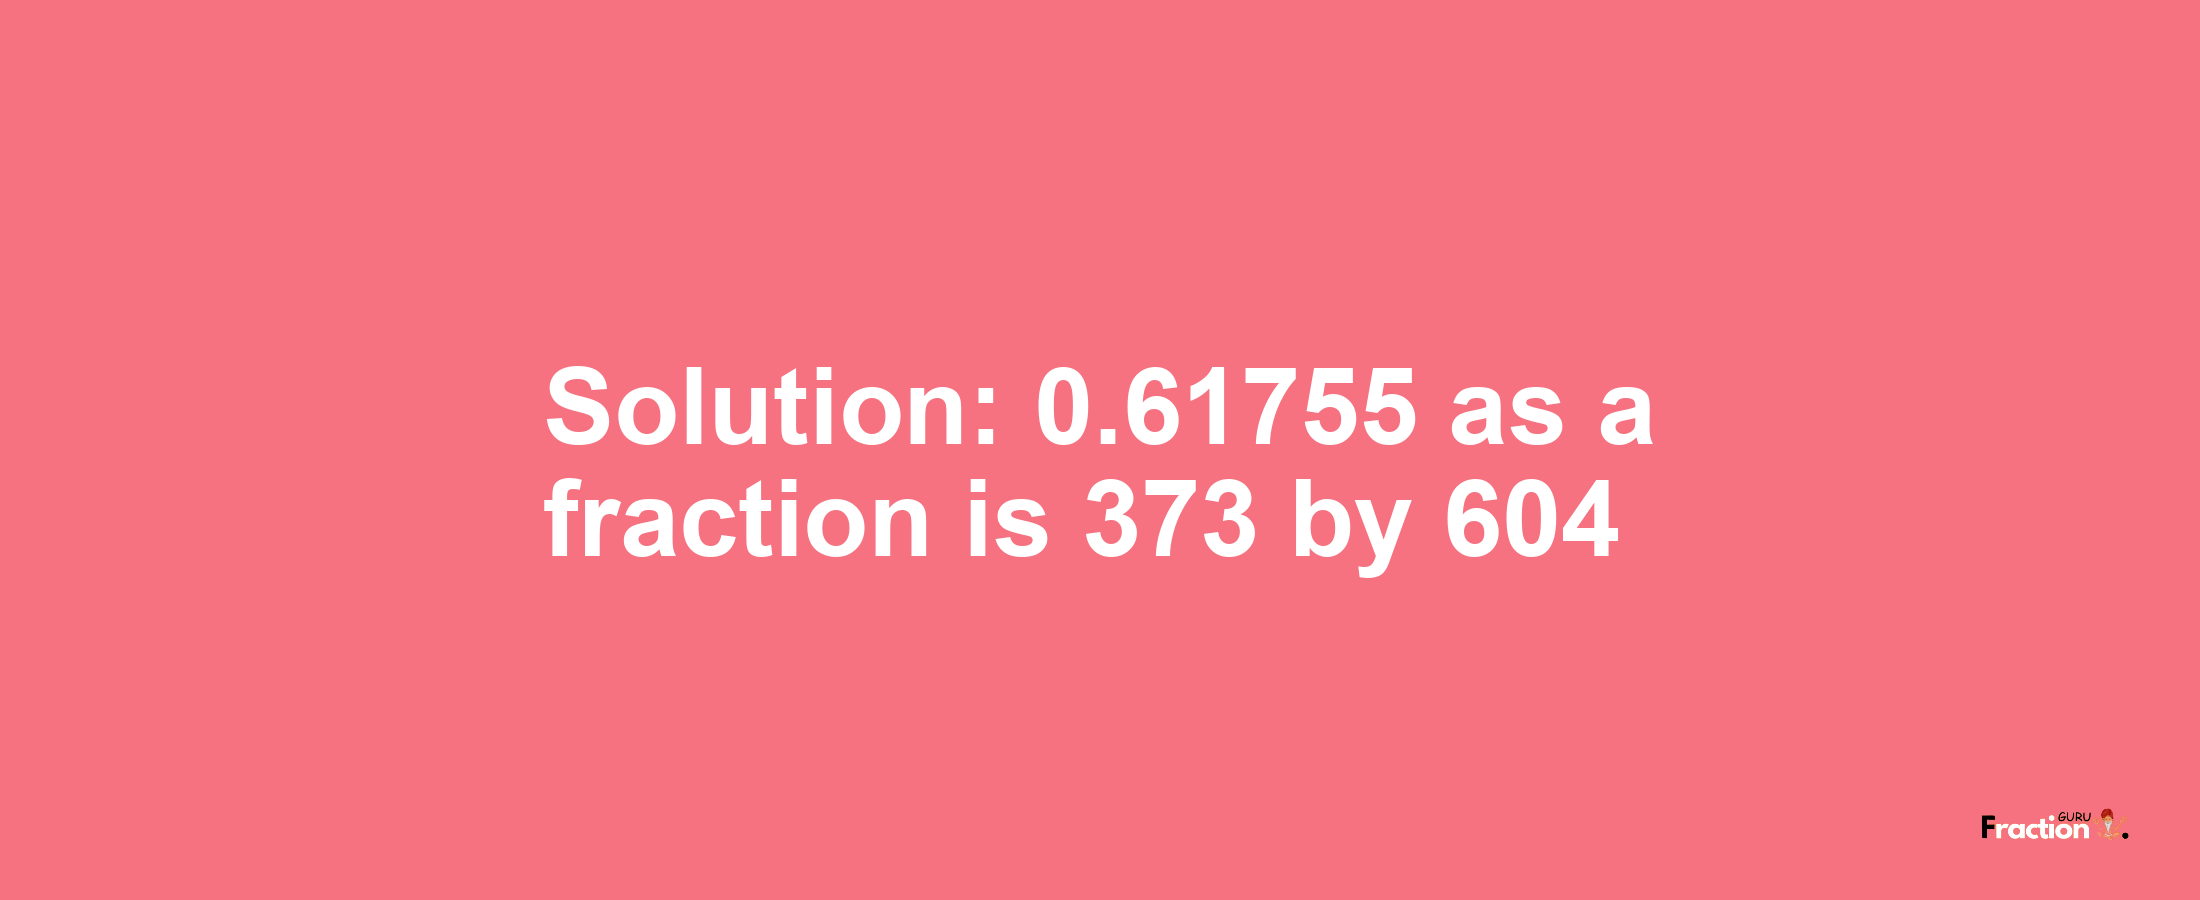 Solution:0.61755 as a fraction is 373/604